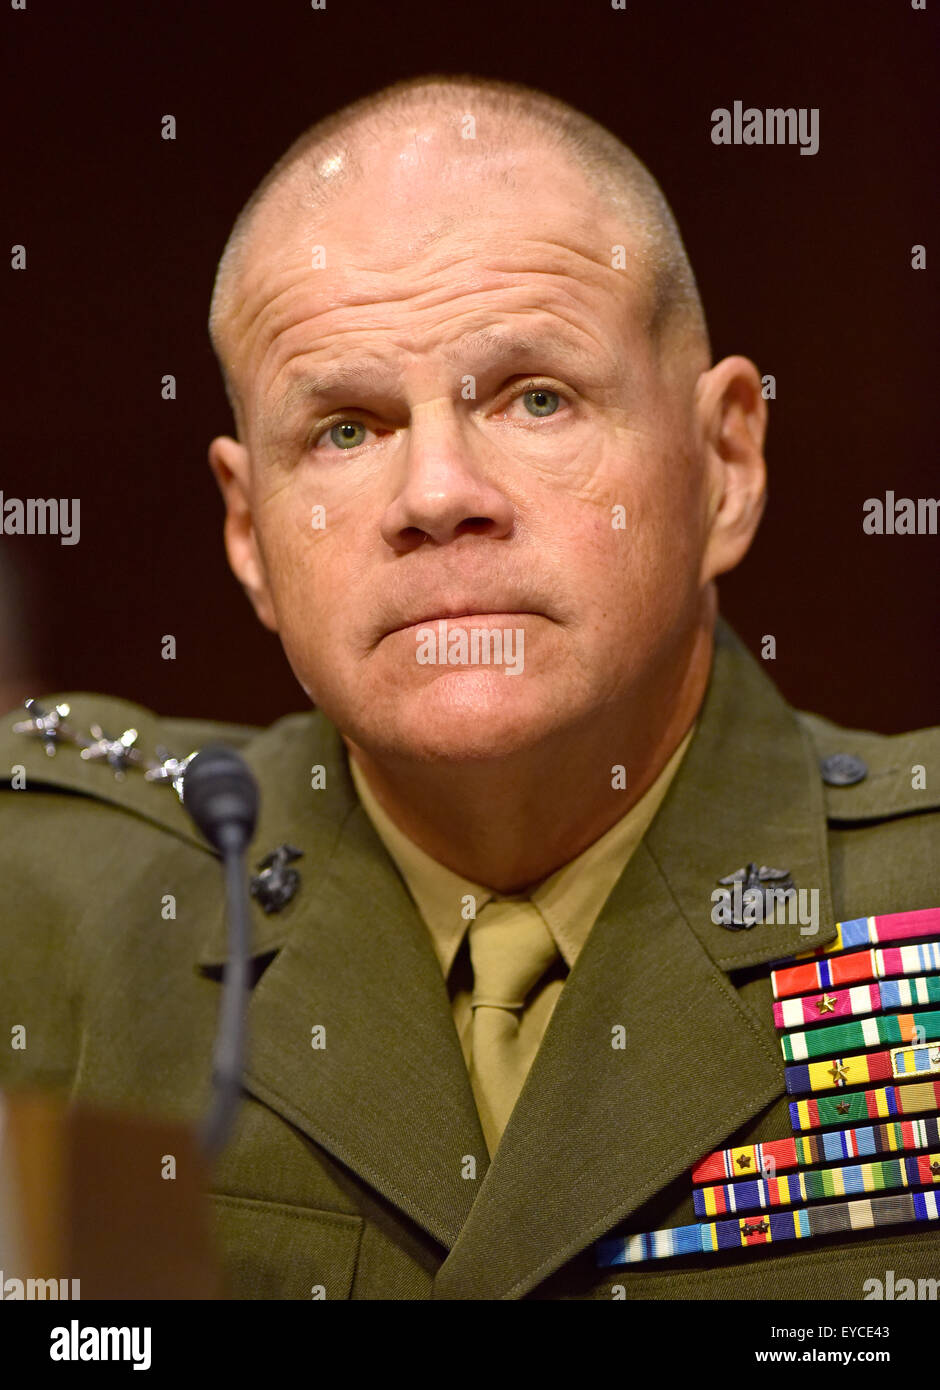 Lieutenant General Robert B. Neller, USMC appears before the United States Senate Committee on Armed Services considering his nomination as General and Commandant of the US Marine Corps on Capitol Hill in Washington, DC on Thursday, July 23, 2015. Credit: Ron Sachs/CNP - NO WIRE SERVICE - Stock Photo